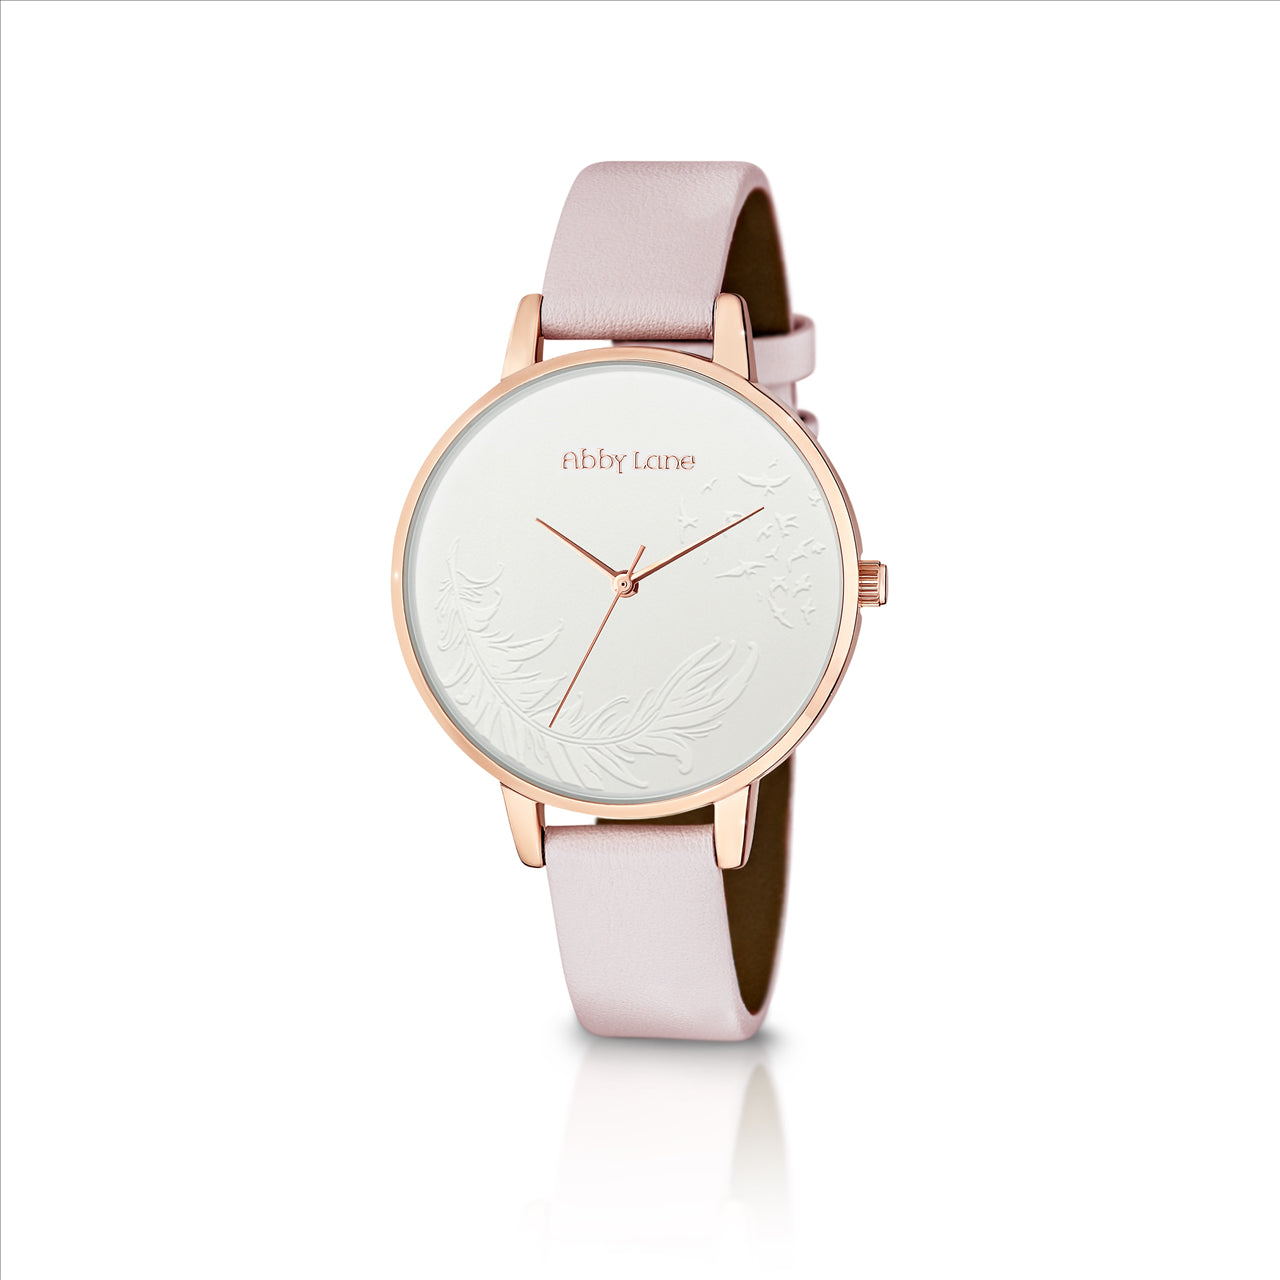 Abby lane emma rosetone case. white embossed dial with feather pattern. pink leather strap. case size 38mm